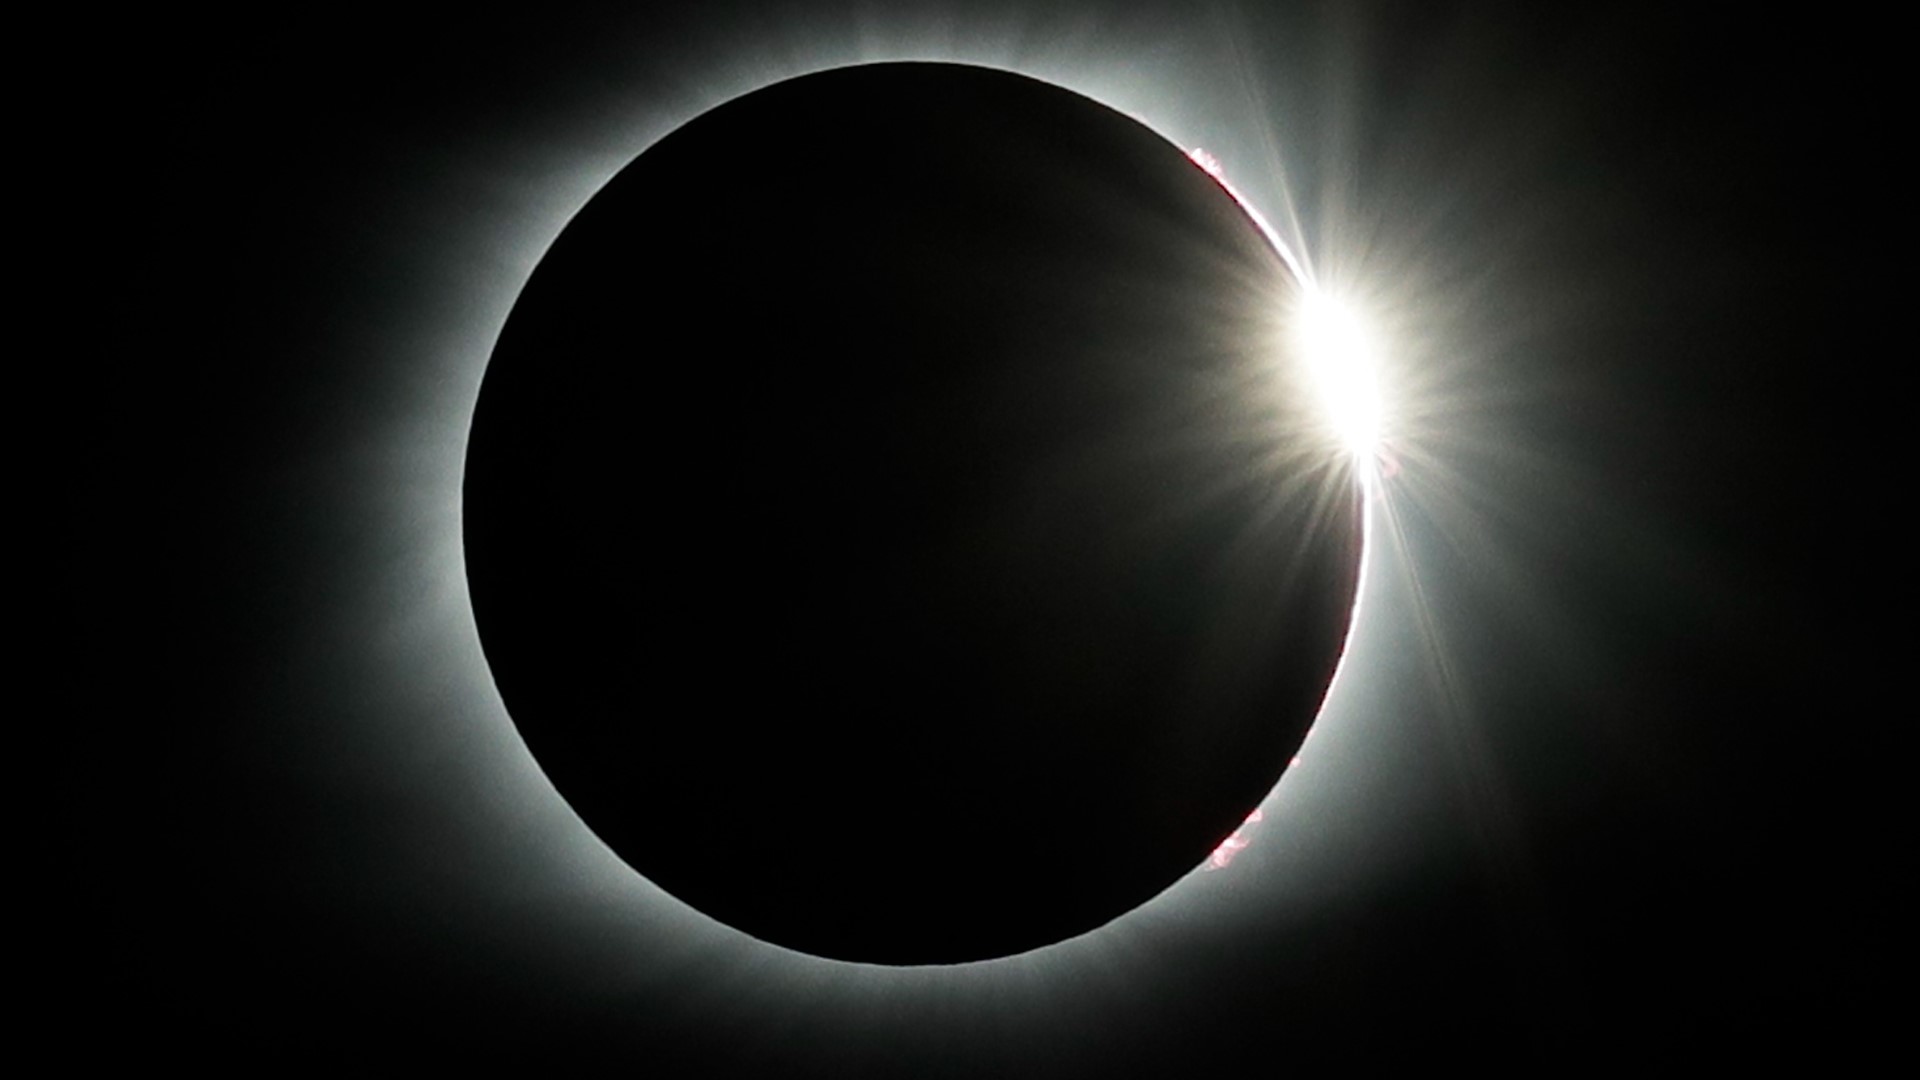 The eclipse is set for April 8th, 2024 at 1:45 Central. Mark your Calendars!